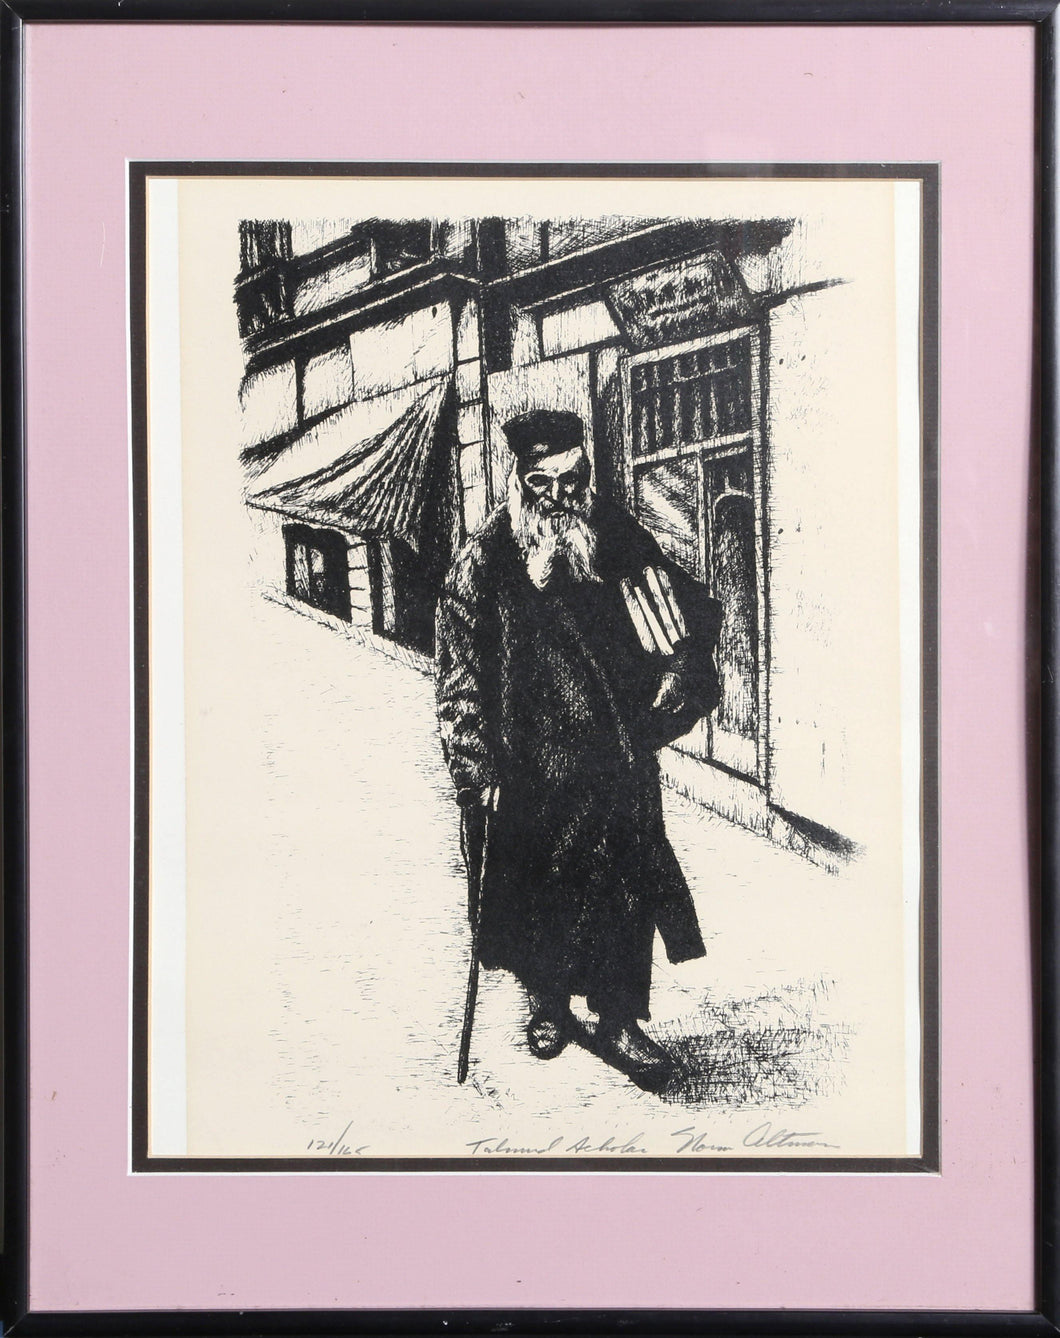 Talmud Scholar Lithograph | Norm Altman,{{product.type}}